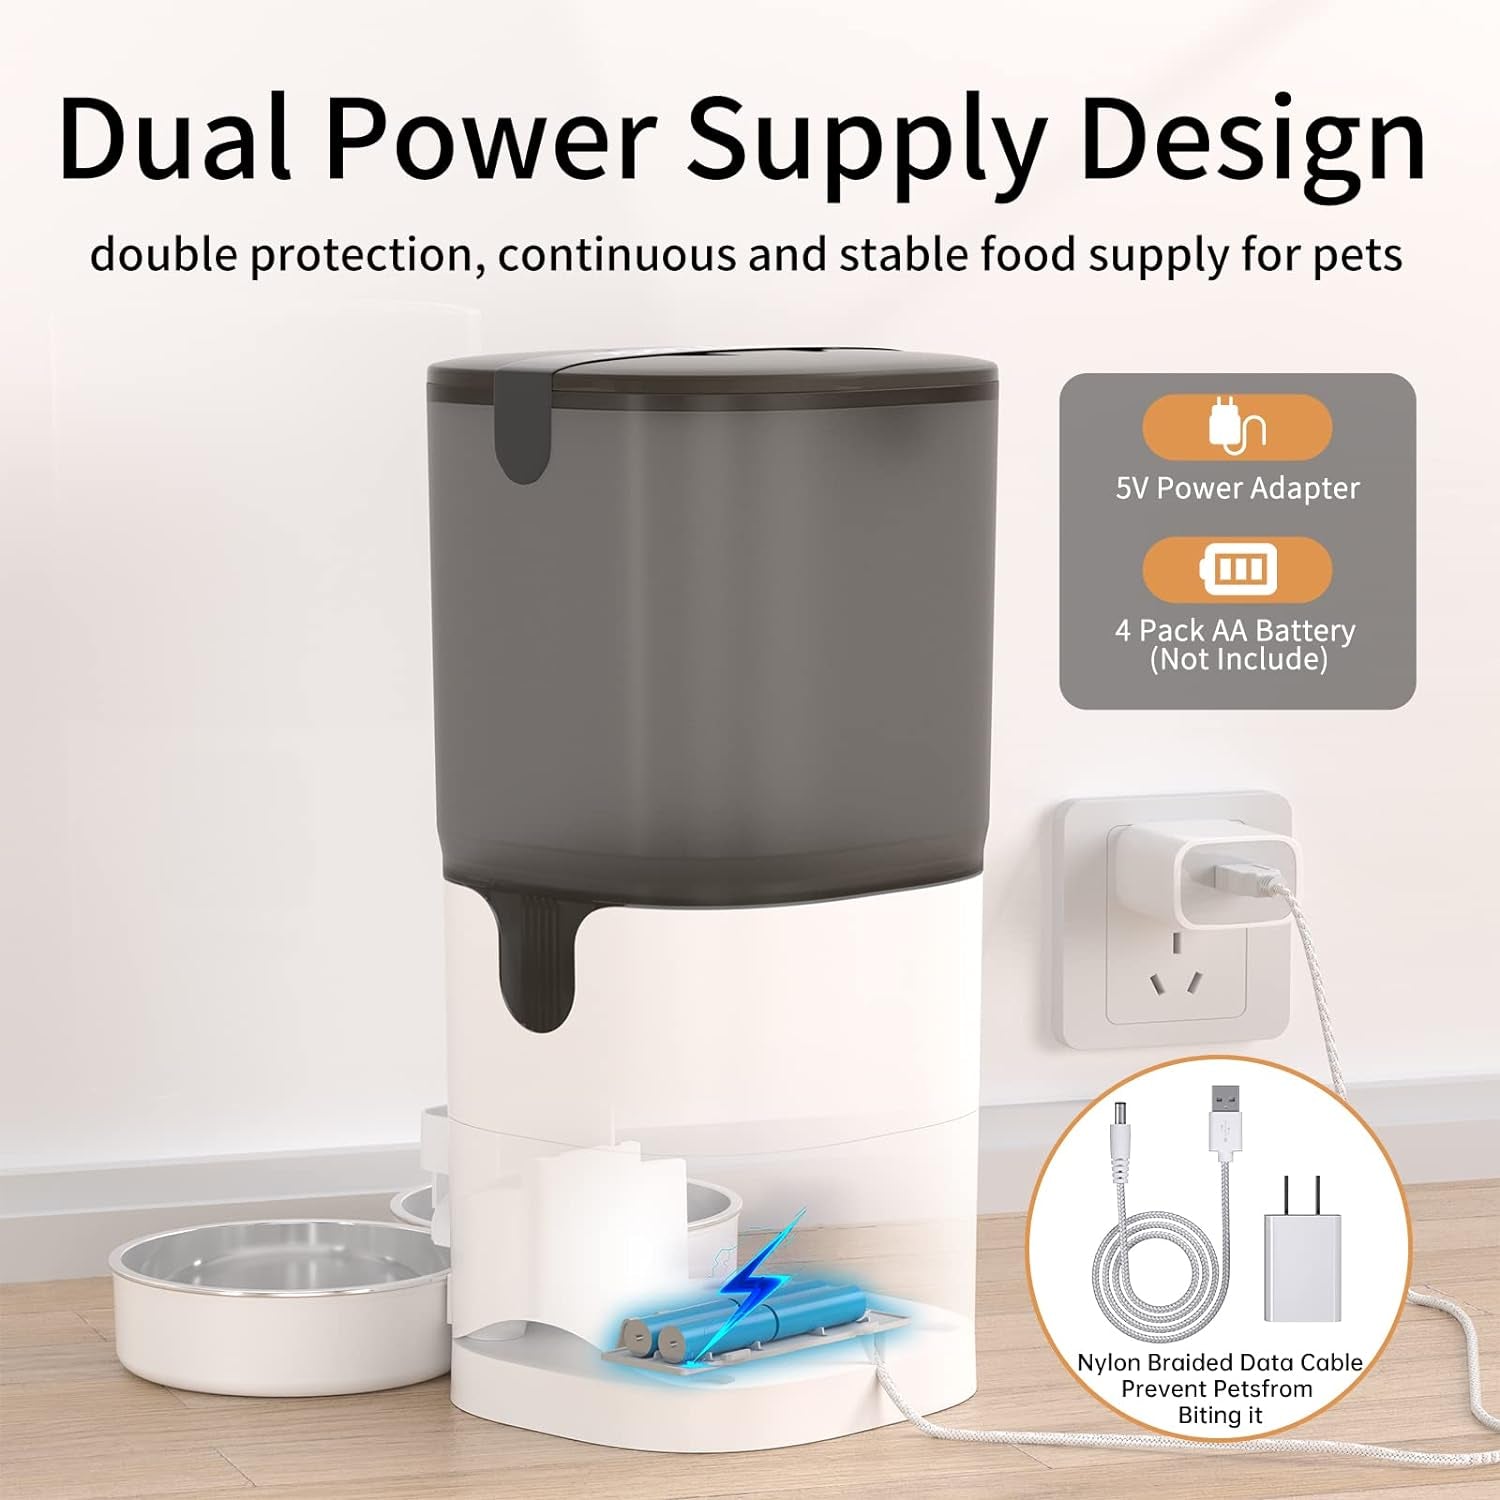 Automatic Dual Cat Feeder with WiFi Control and Freshness Preservation for Two Cats